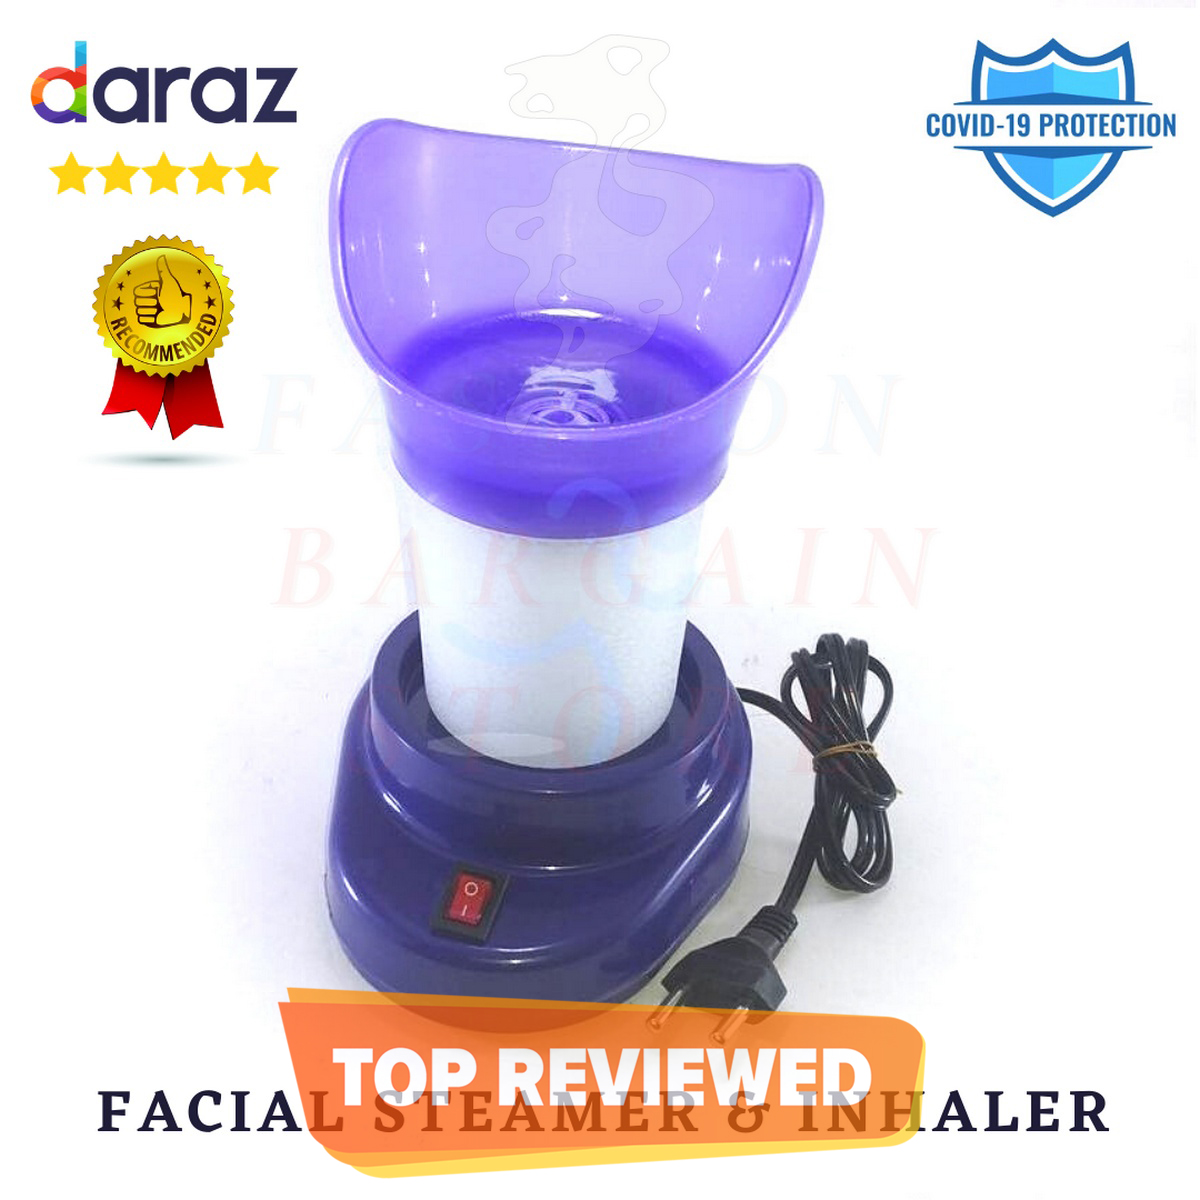 Facial Steamer For Blocked Nose Facial Usage Cold Flu Fever Chest Congestion Relief By Shinon Buy Online At Best Prices In Pakistan Daraz Pk